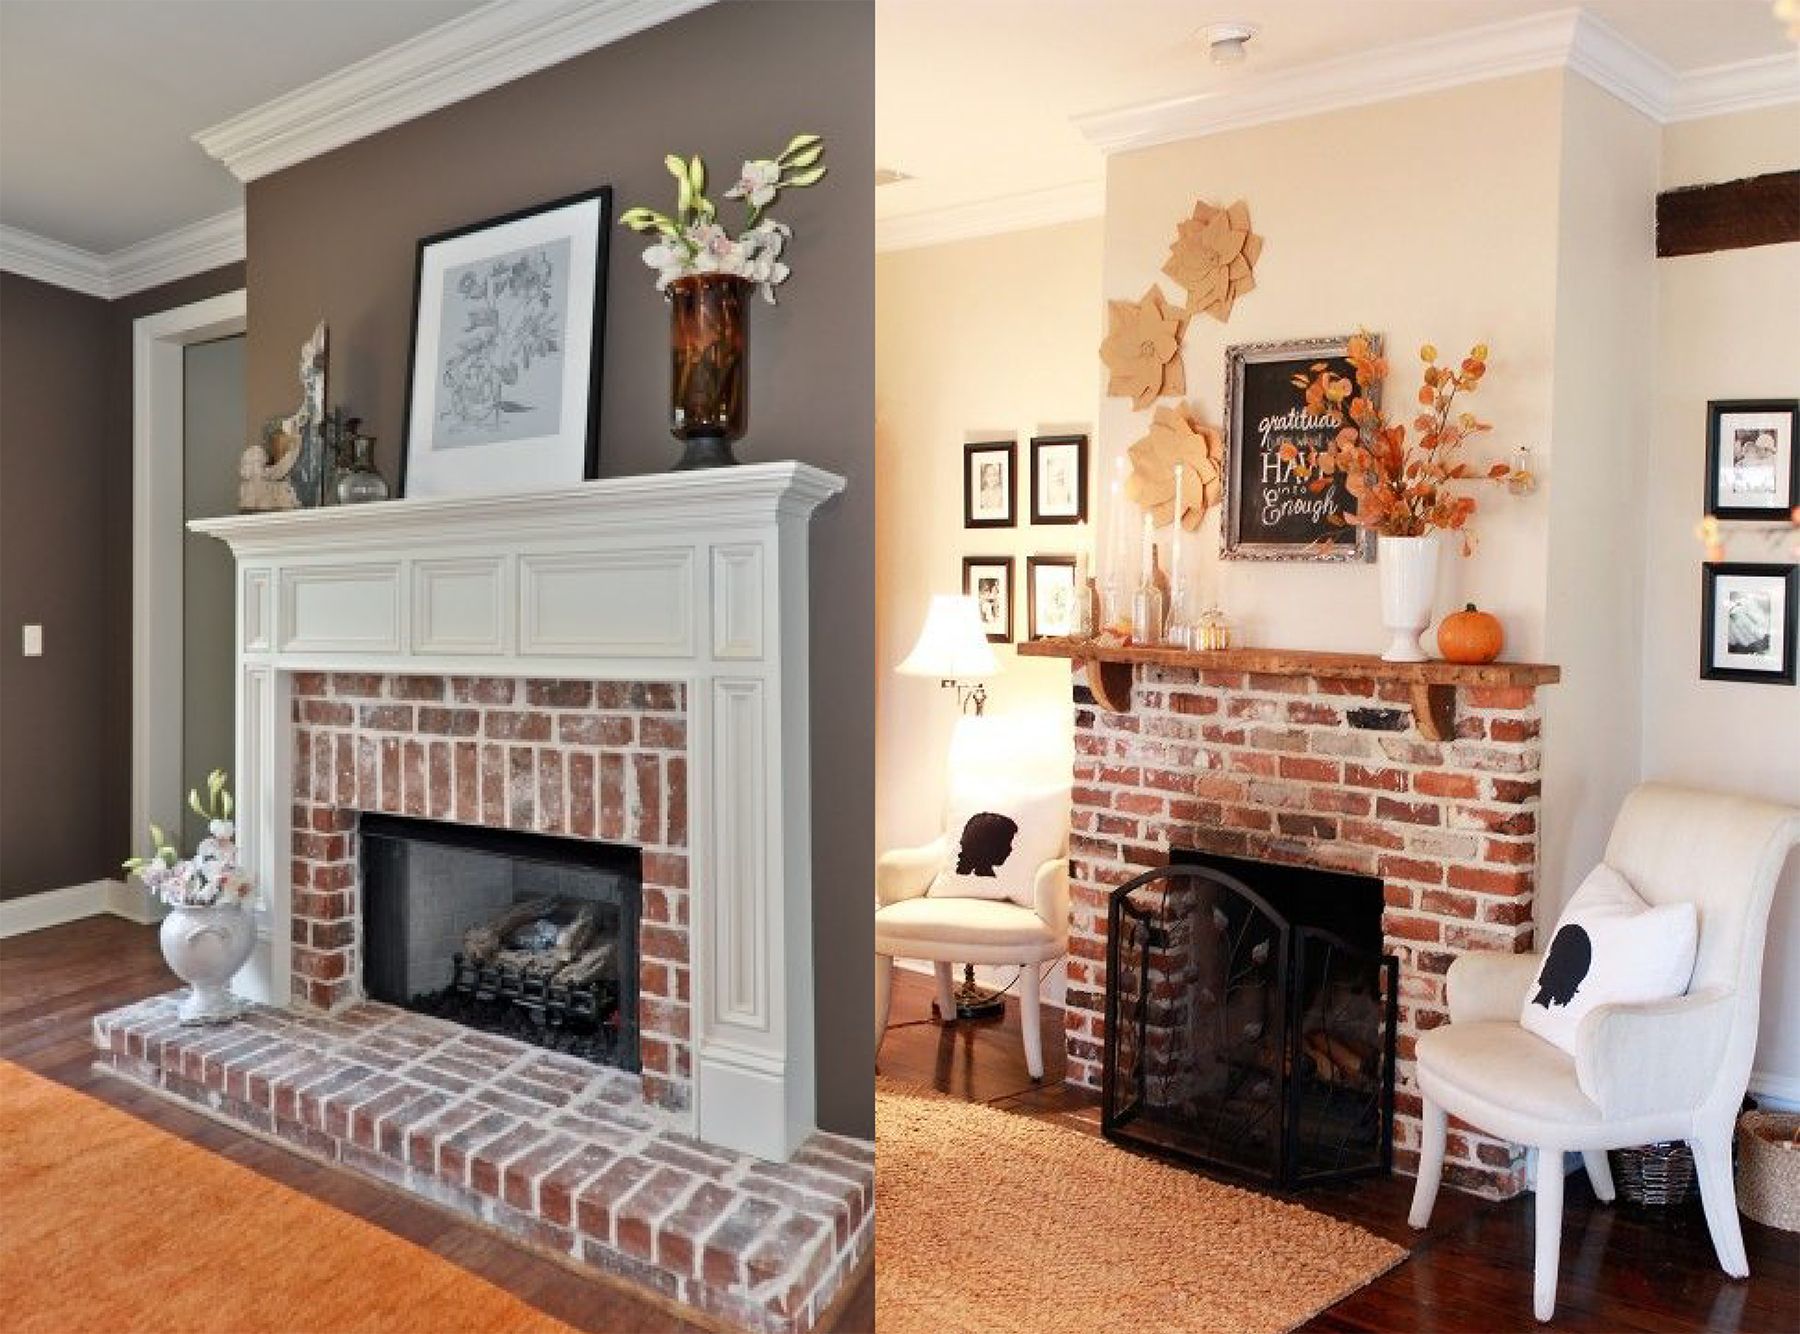 How to Brick A Fireplace Luxury Exposed Brick Fireplace Almond Home In 2019